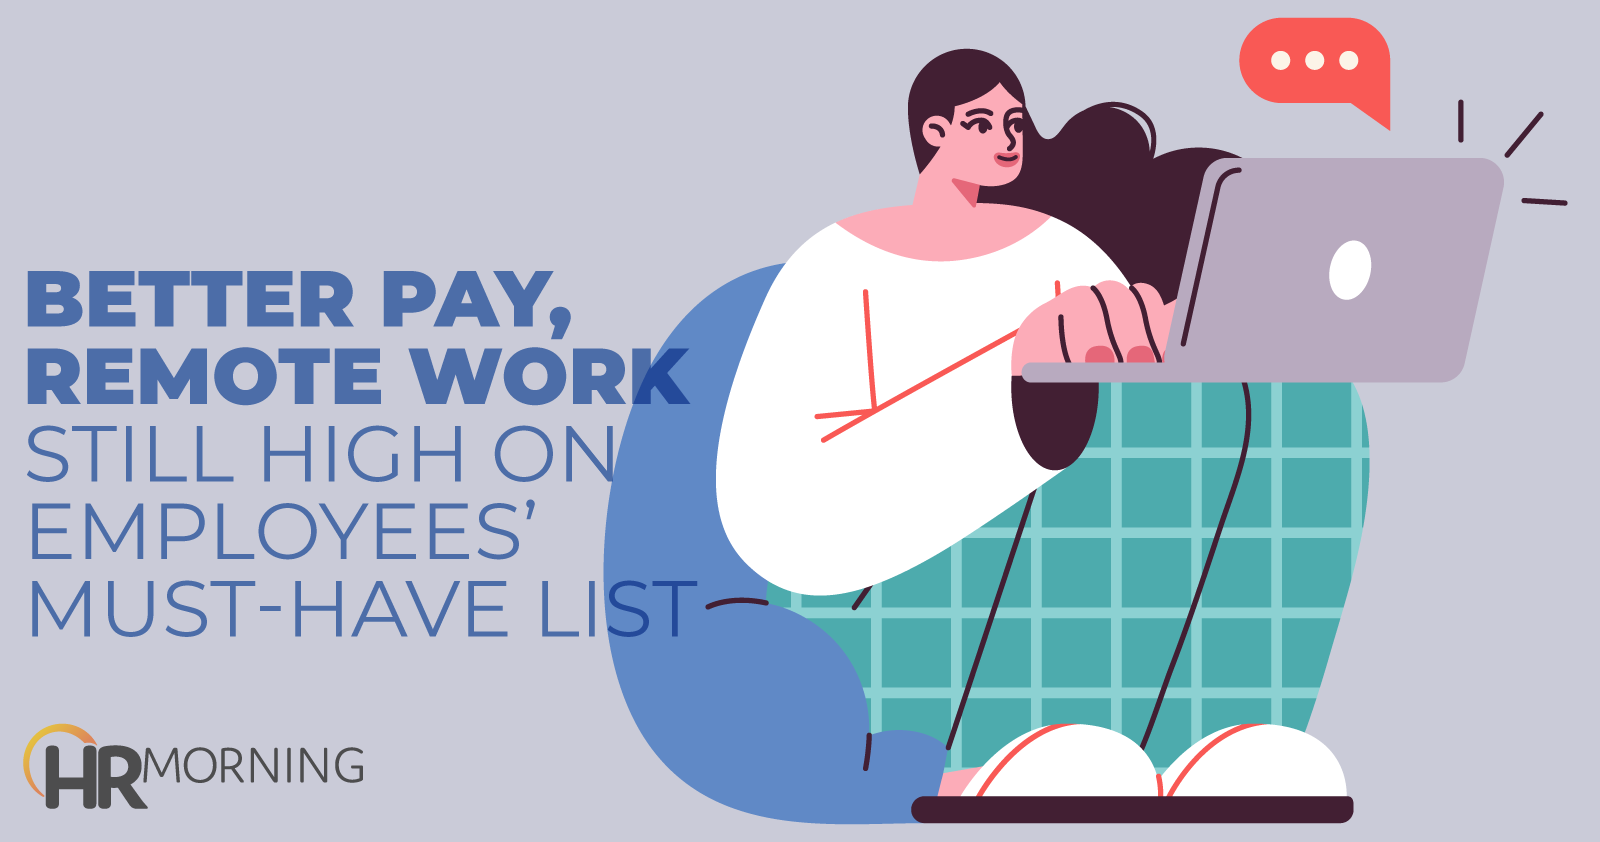 Bette rPay Remote WorK Still High On Employees Must-Have List